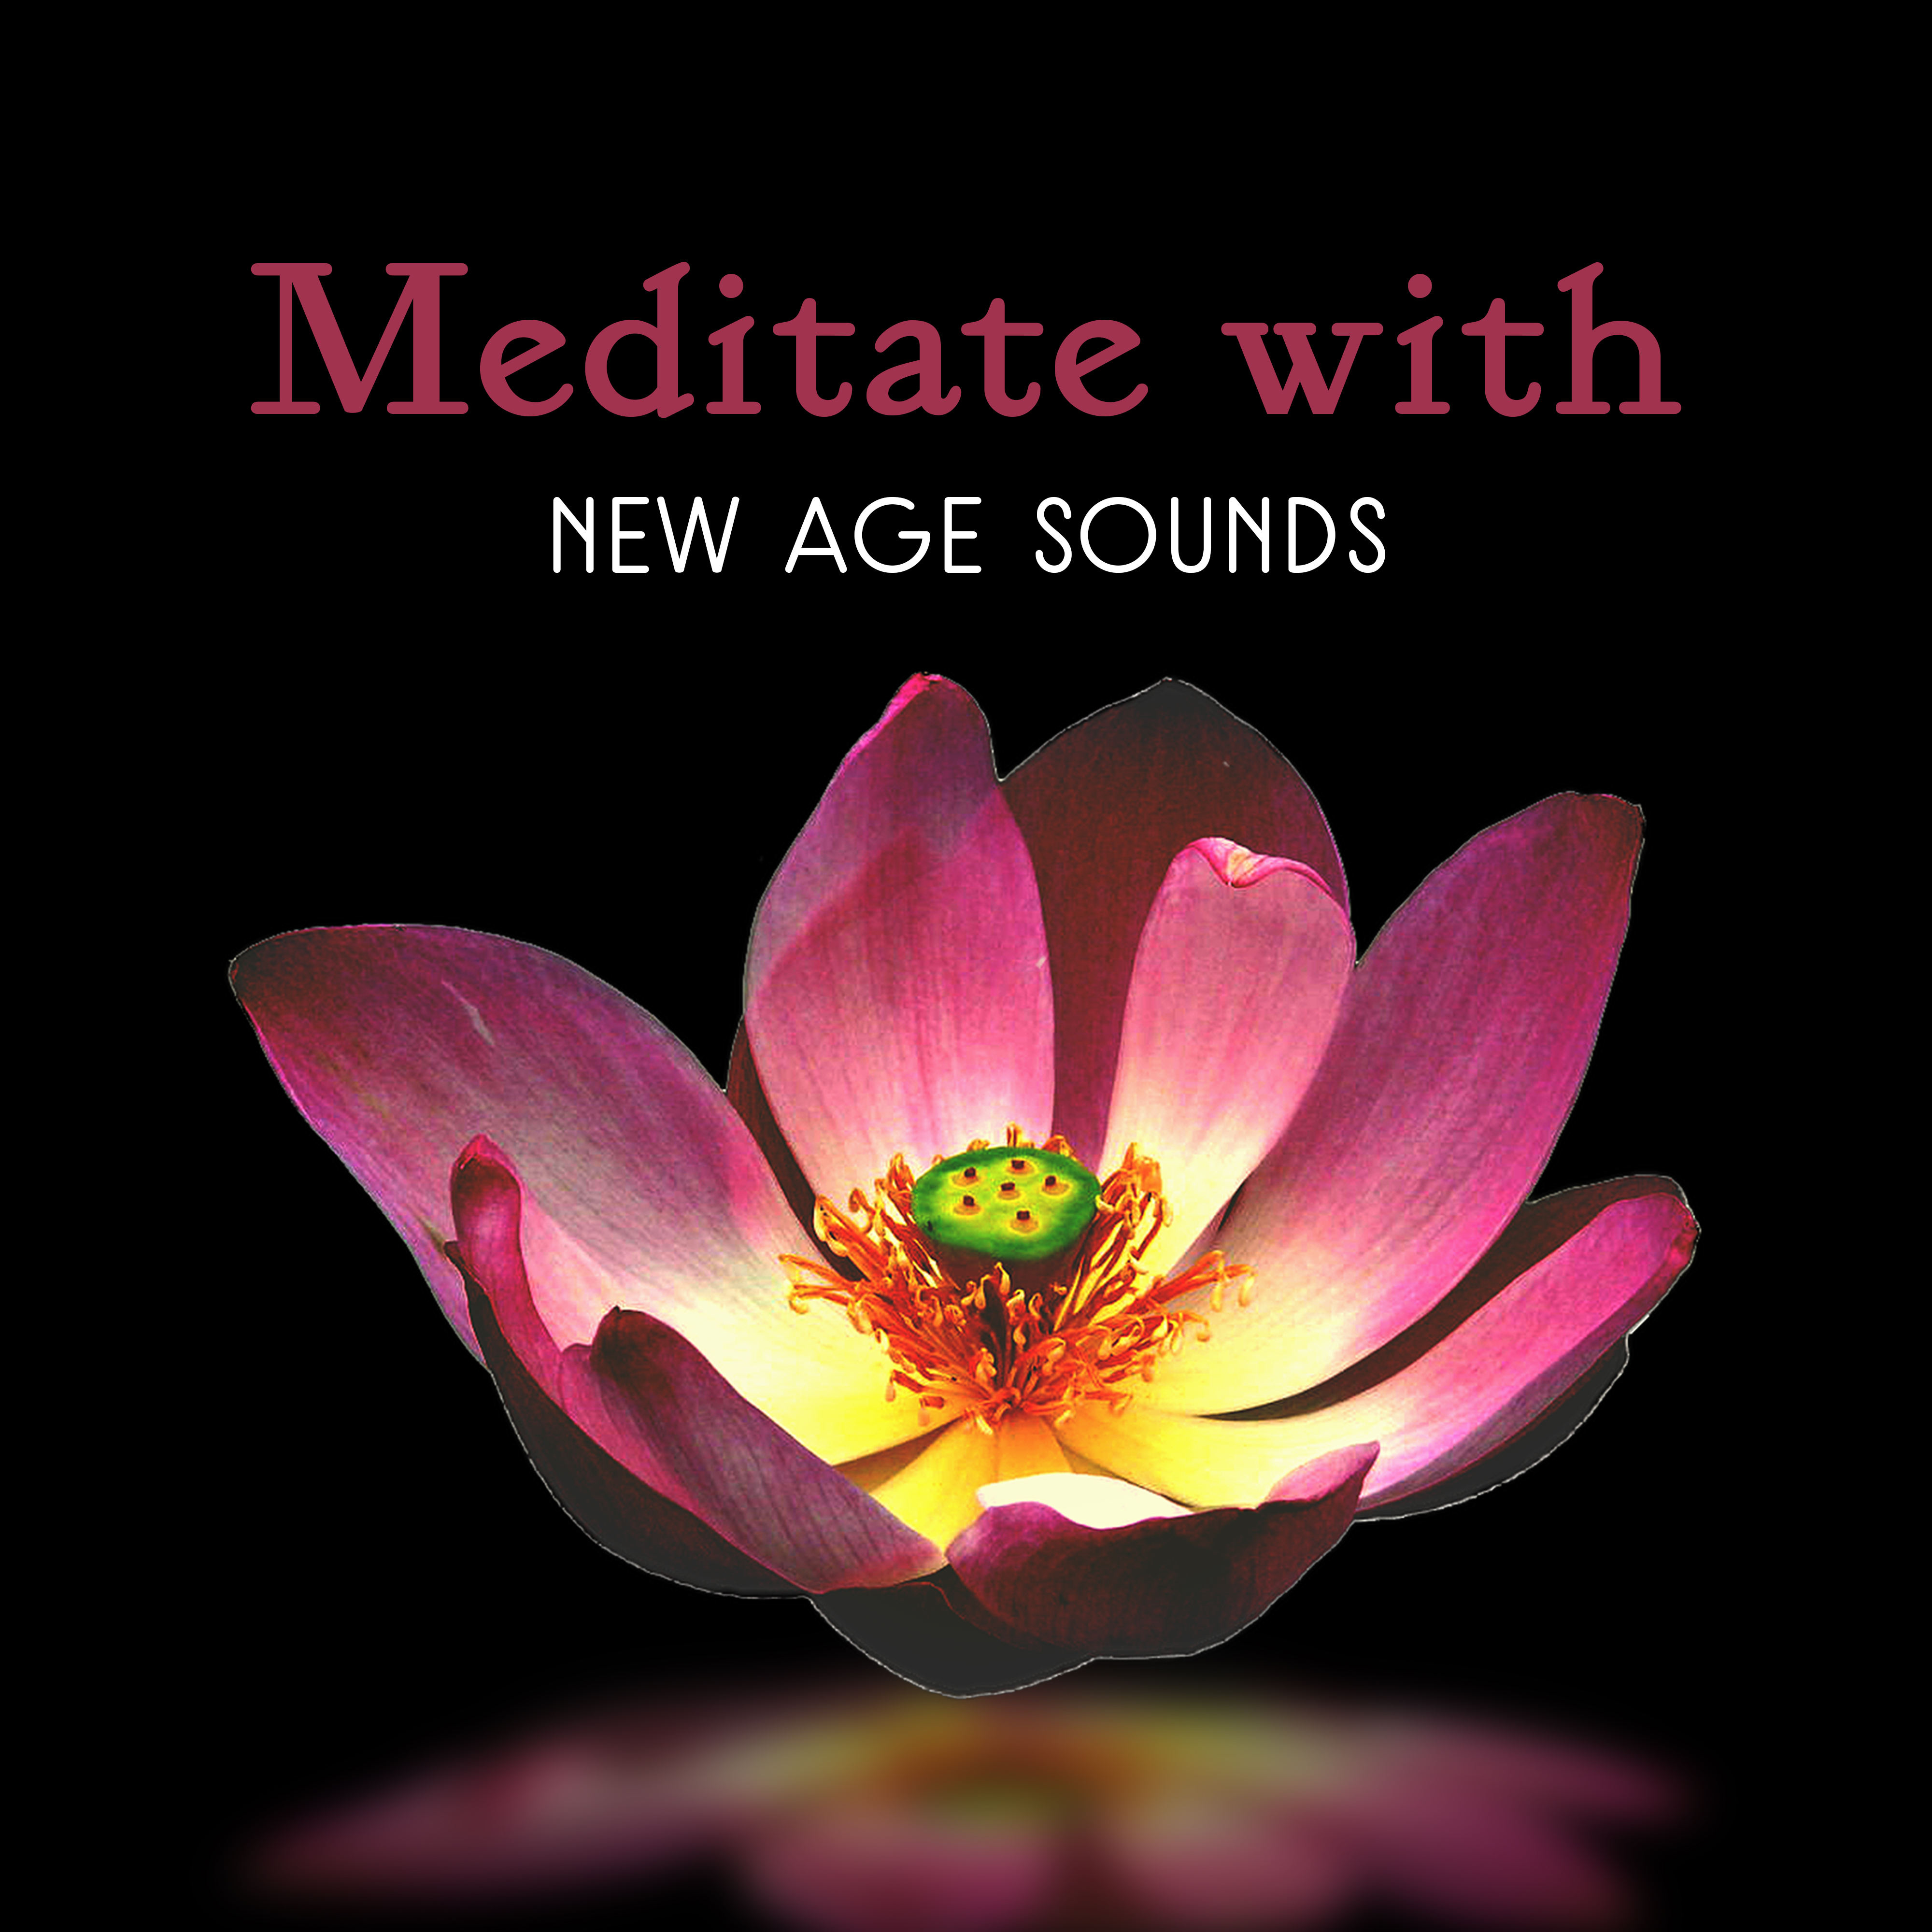 Meditate with New Age Sounds – Meditate & Rest, Mind & Body Relaxation, Spirit Journey, Inner Peace